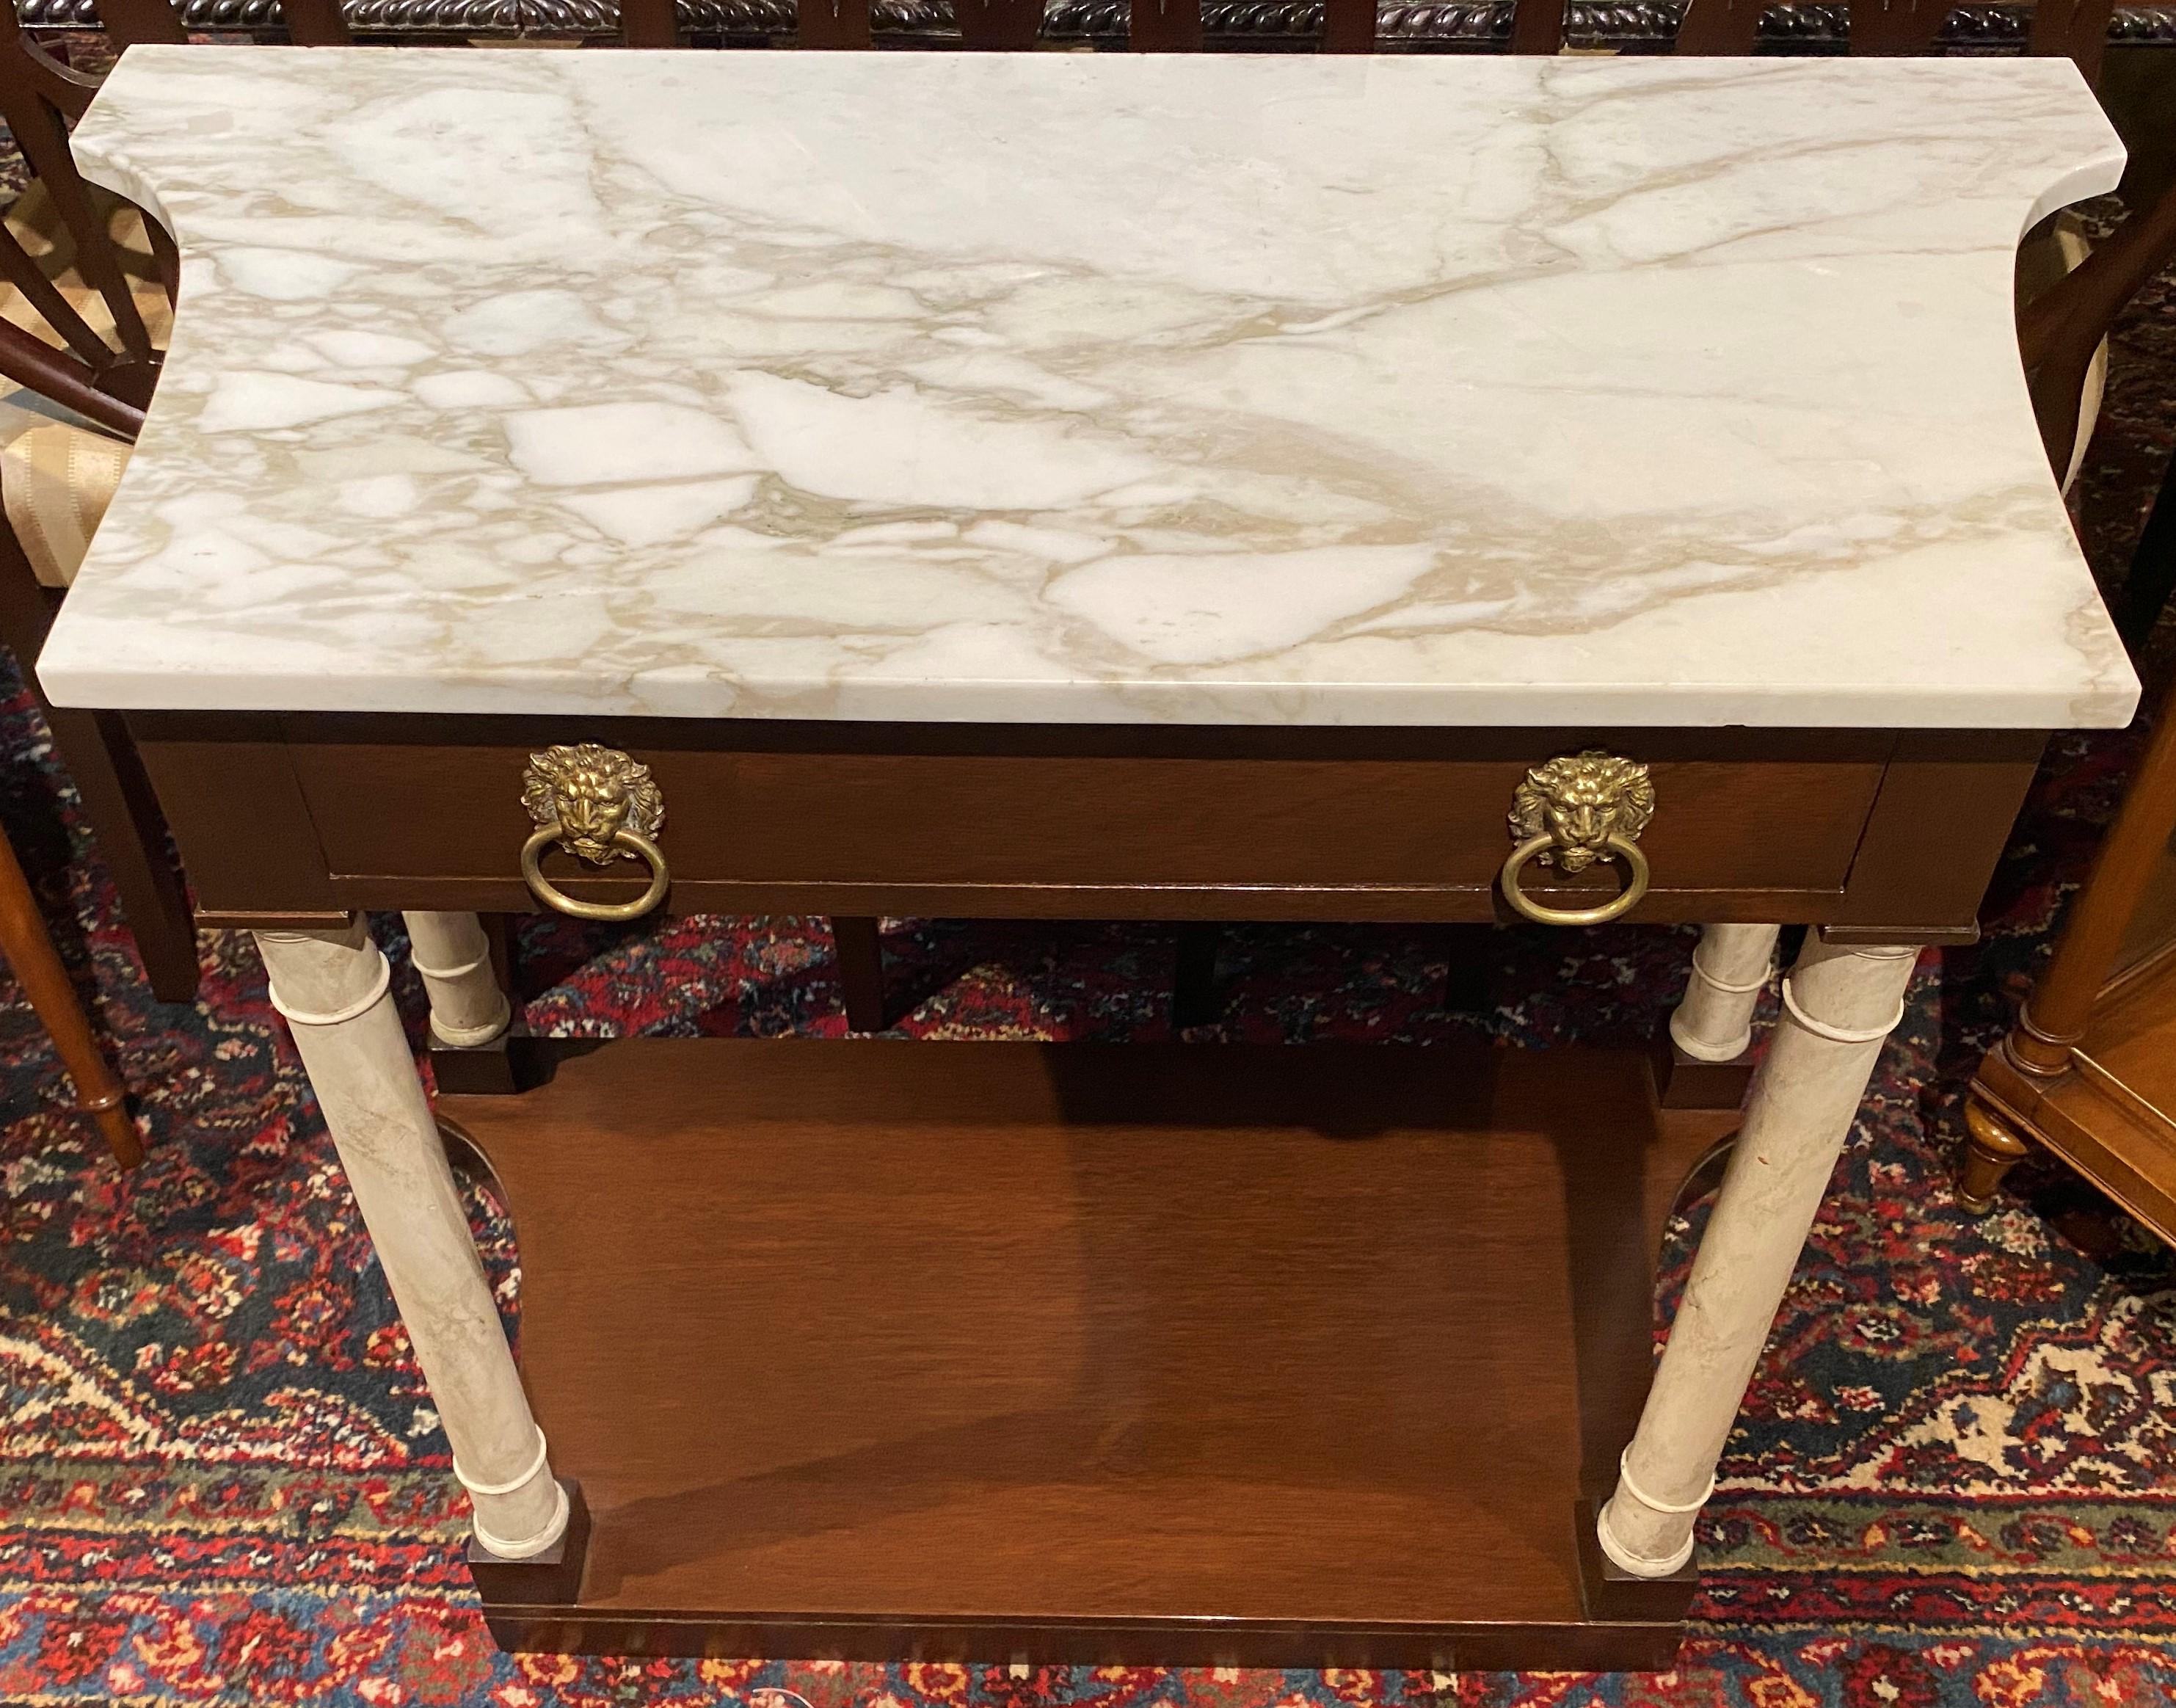 A classical form custom marble top shaped single drawer console with faux marble painted wooden pilasters, shaped base, and solid brass lions head round pulls. A Kittinger metal tag appears inside the drawer, along with a Gainsborough Finish label